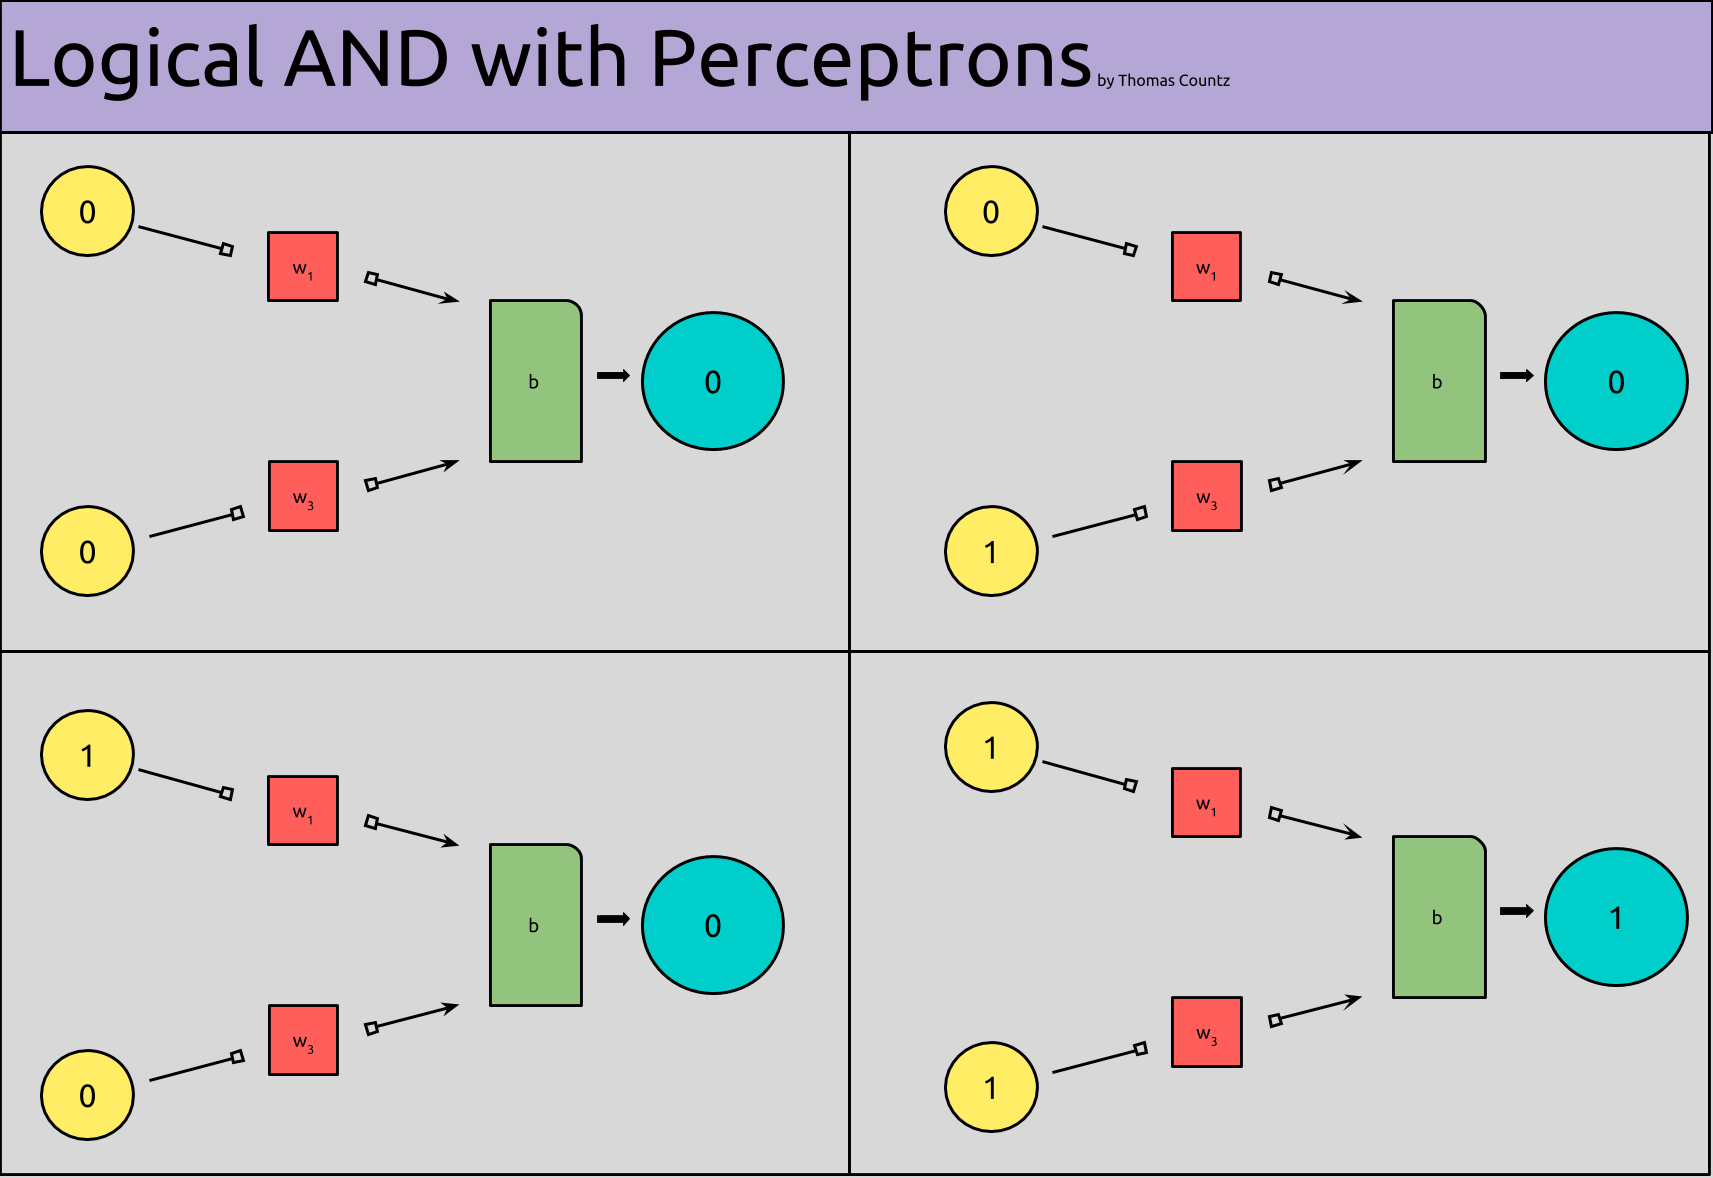 Logical AND with Perceptrons